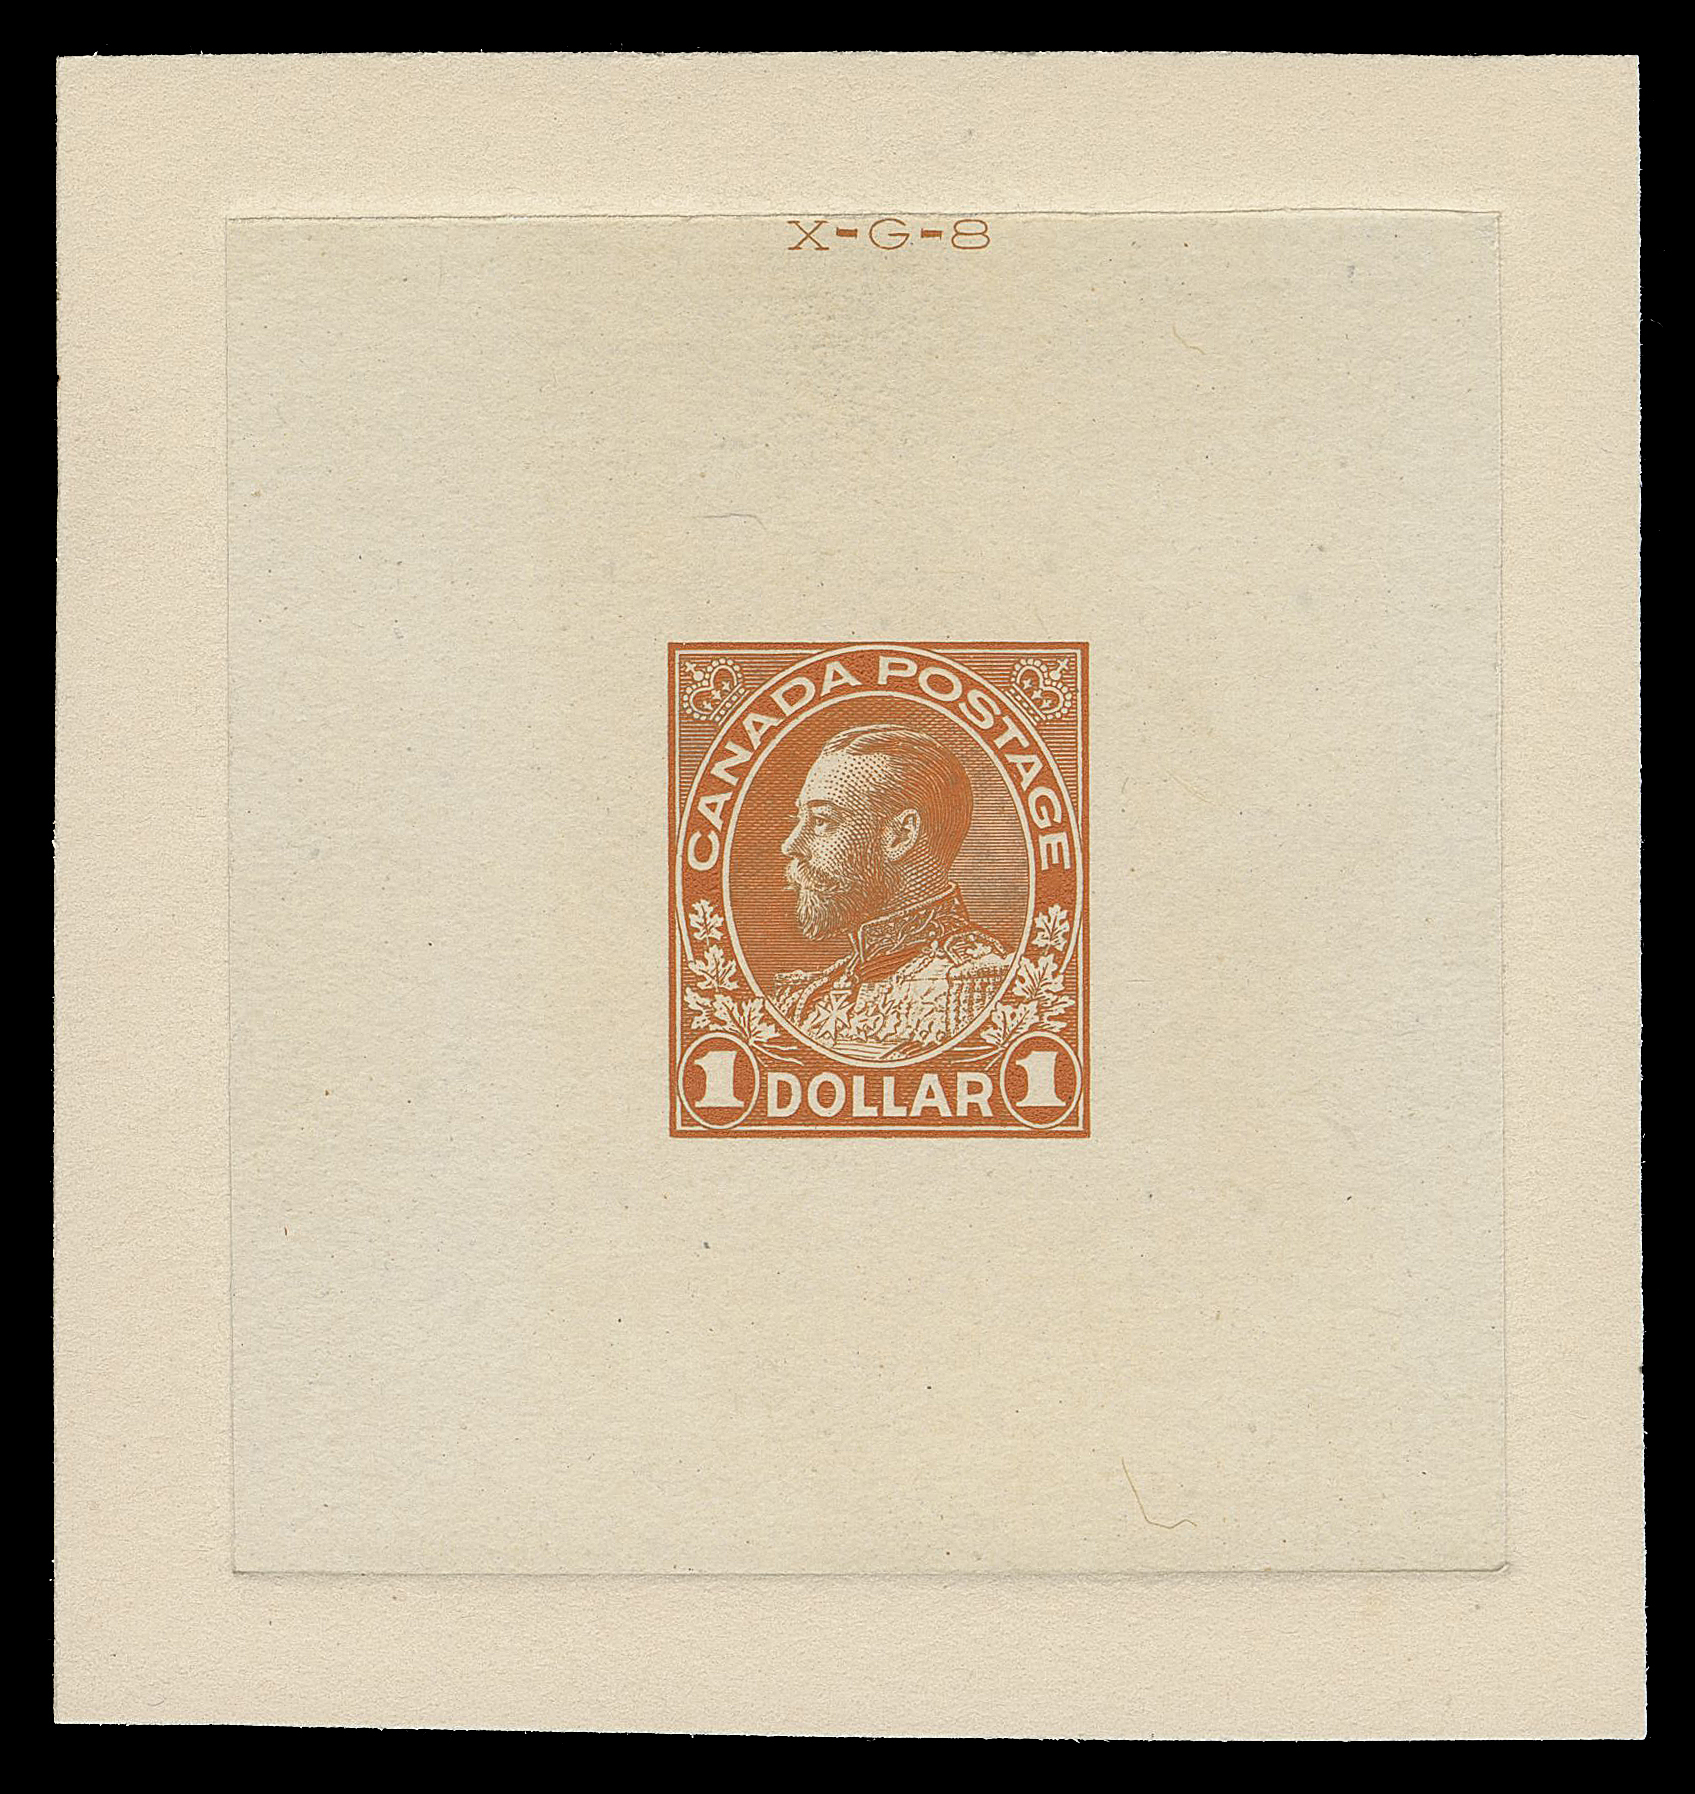 ADMIRAL PROOFS  122,Die Proof in issued colour on india paper 54 x 57mm, die sunk on slightly larger card 67 x 71mm; the hardened die showing die number "XG-8" number above design, slightly oxidized, otherwise VF and scarce (Minuse & Pratt 122P1a)